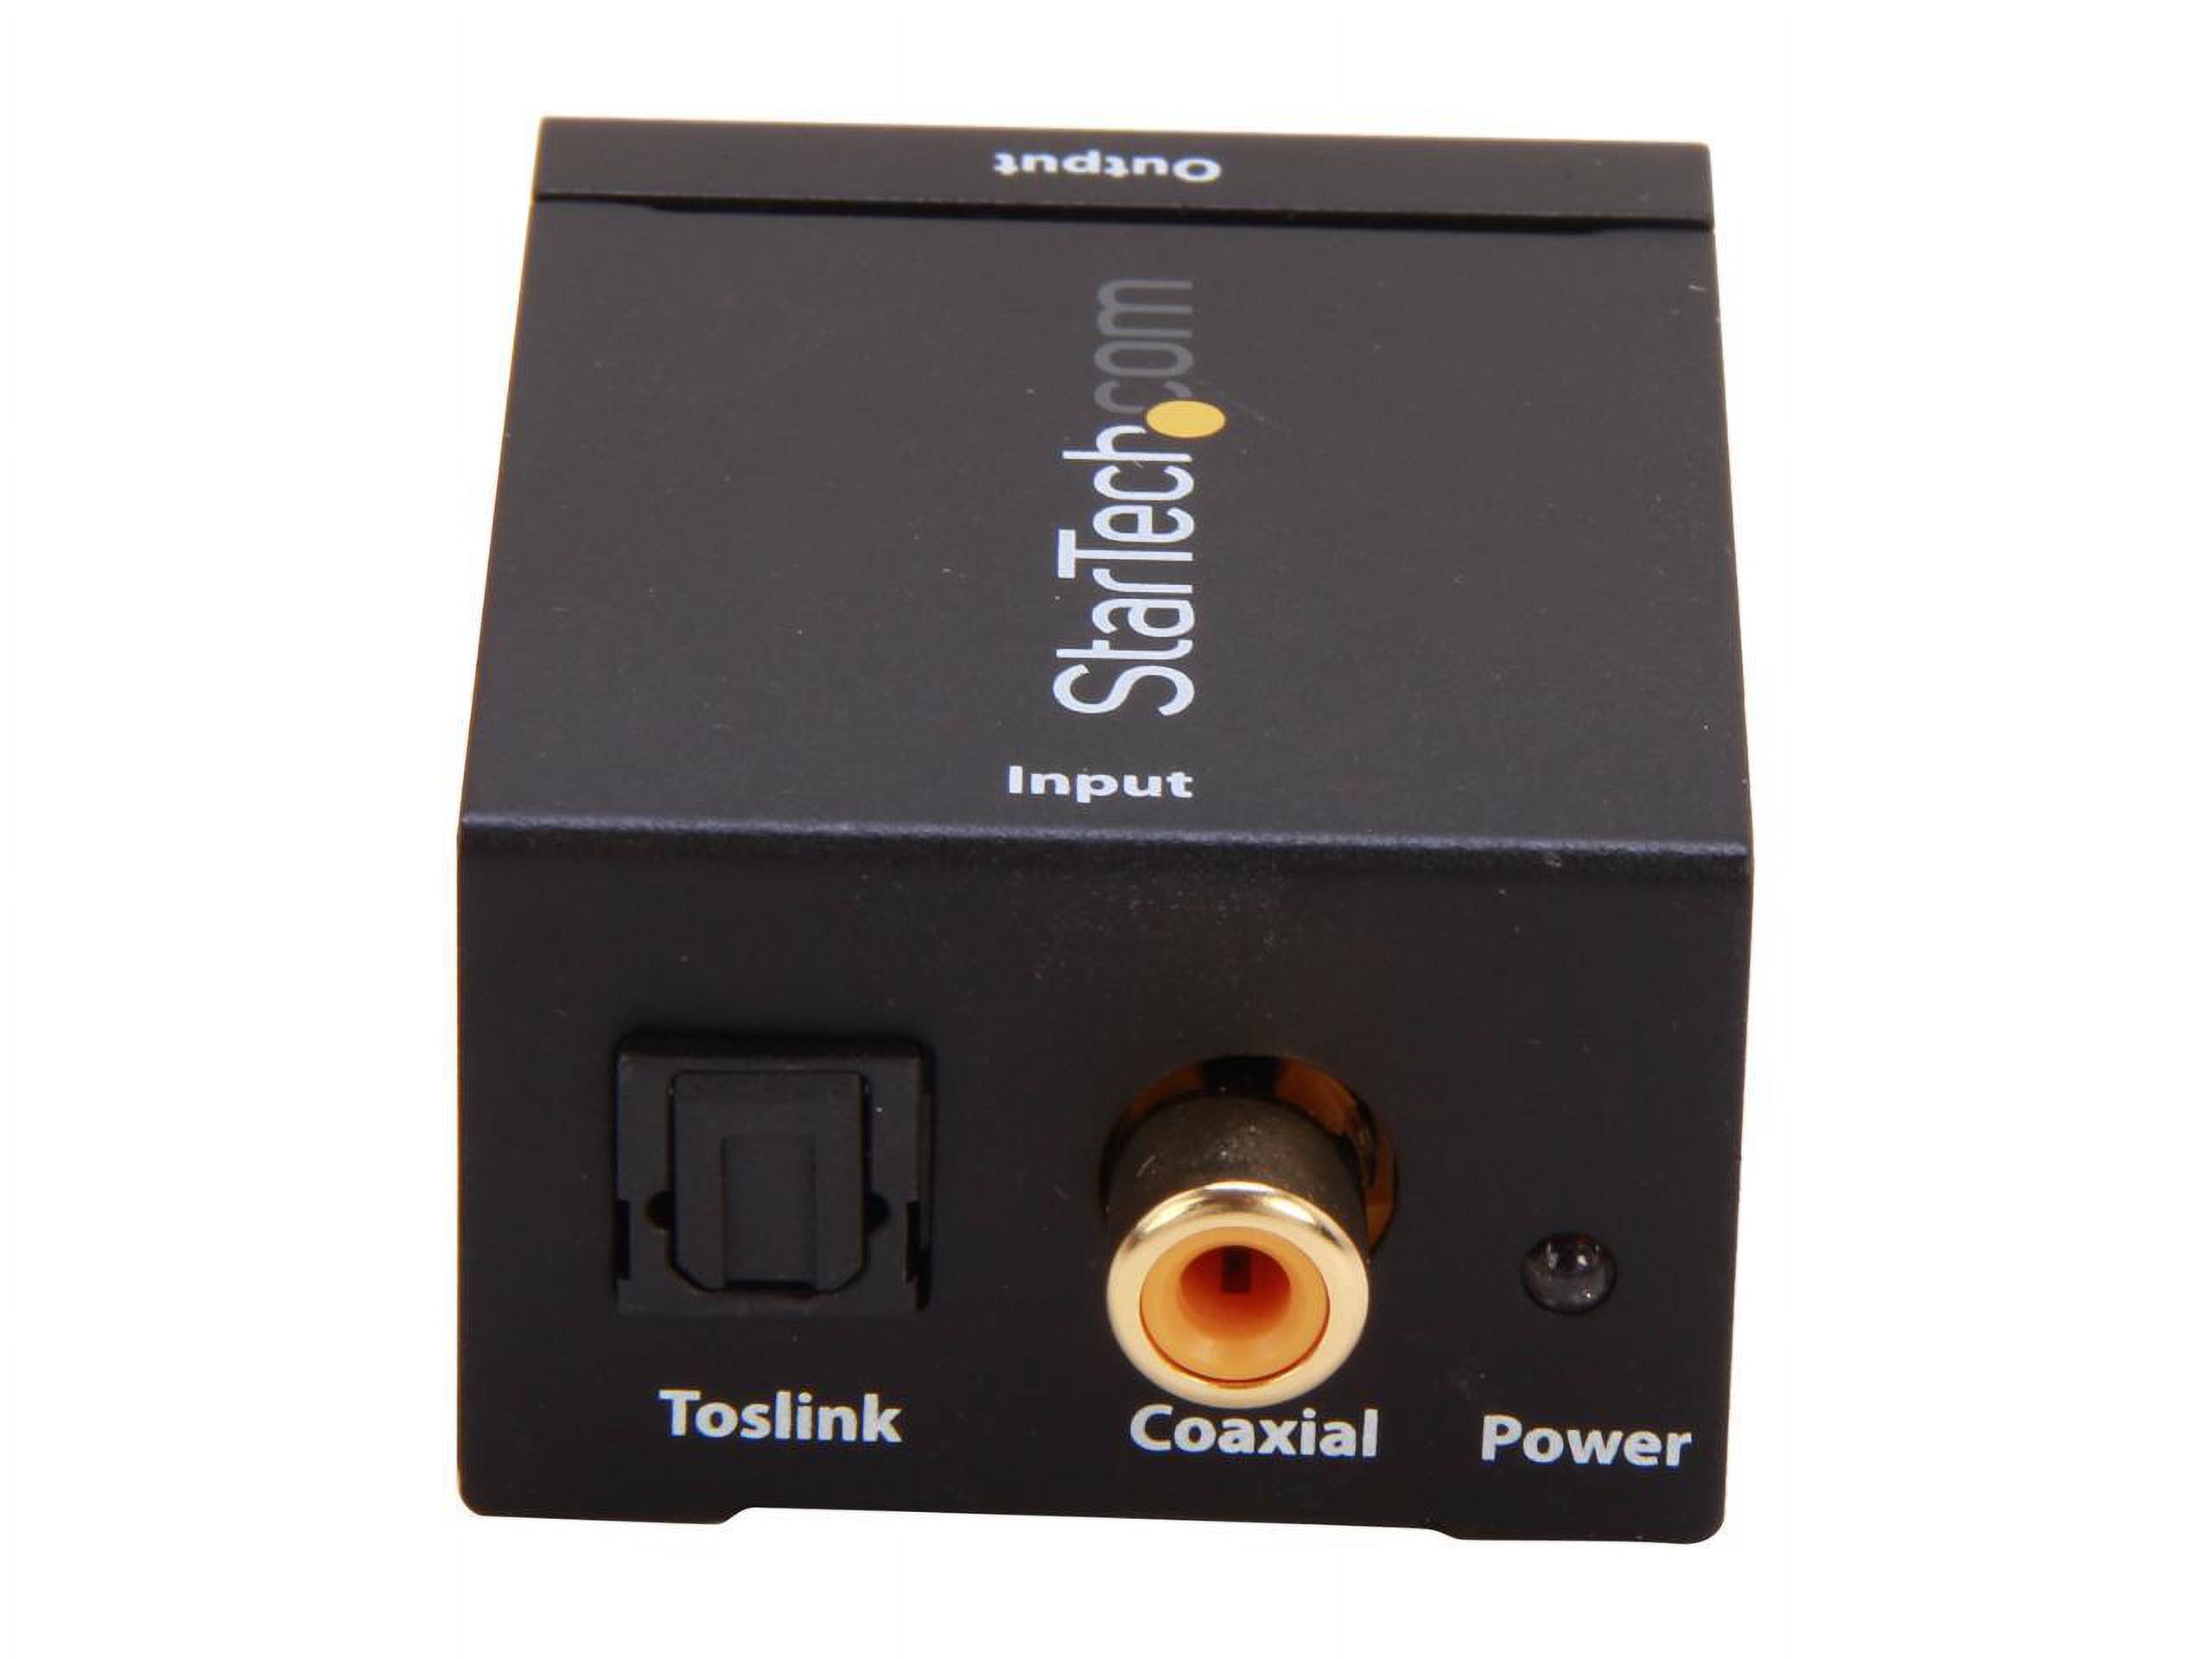 StarTech.com SPDIF2AA SPDIF Digital Coaxial or Toslink to Stereo RCA Audio Converter - image 5 of 5